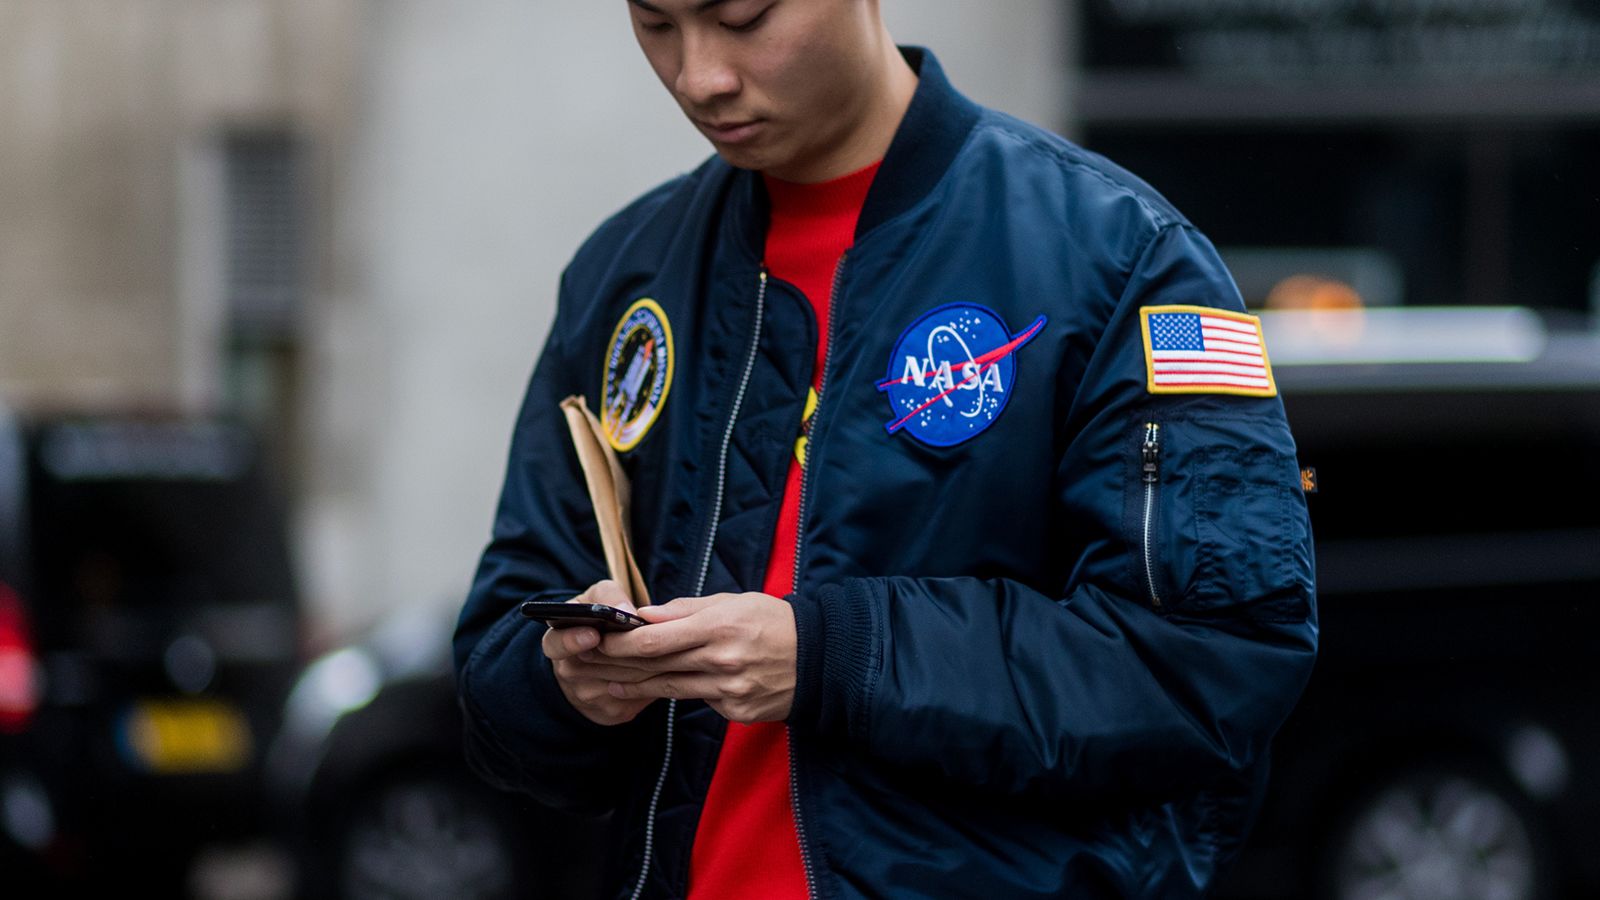 Why everyone's wearing NASA-branded clothes | CNN Business